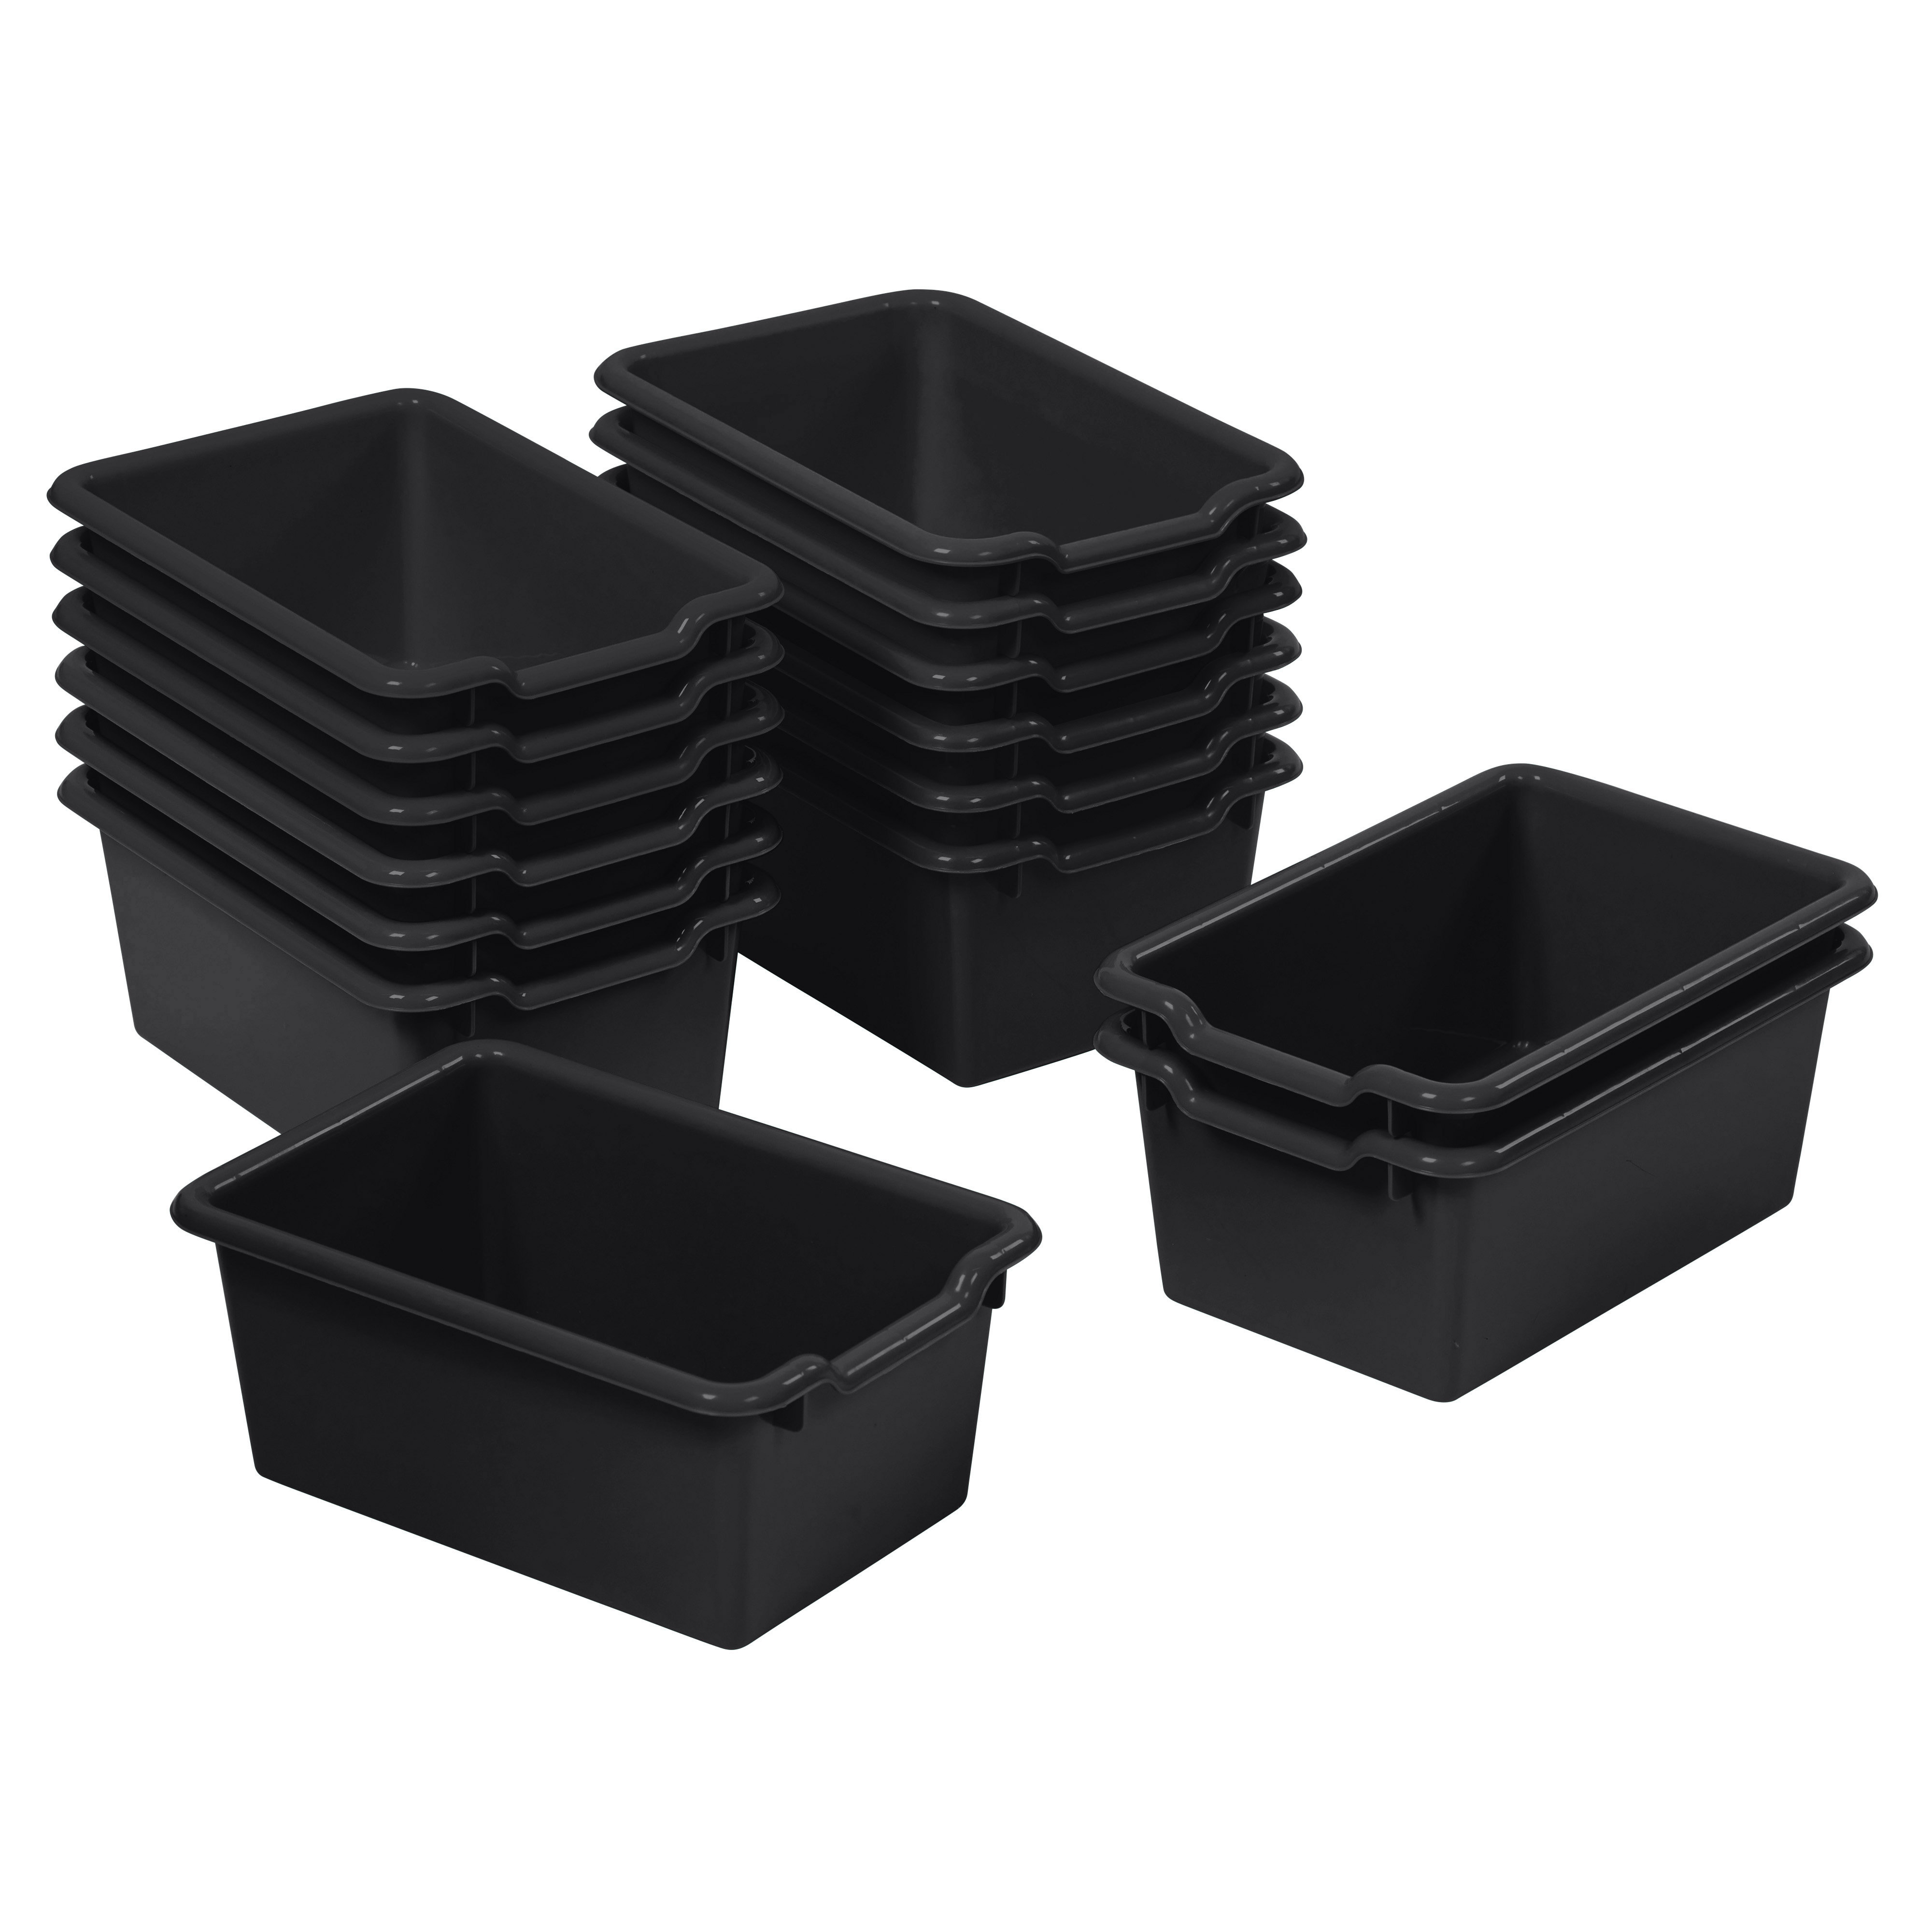 Tupperware Set of 3 Small Canister Scoops with Handles in Peacock